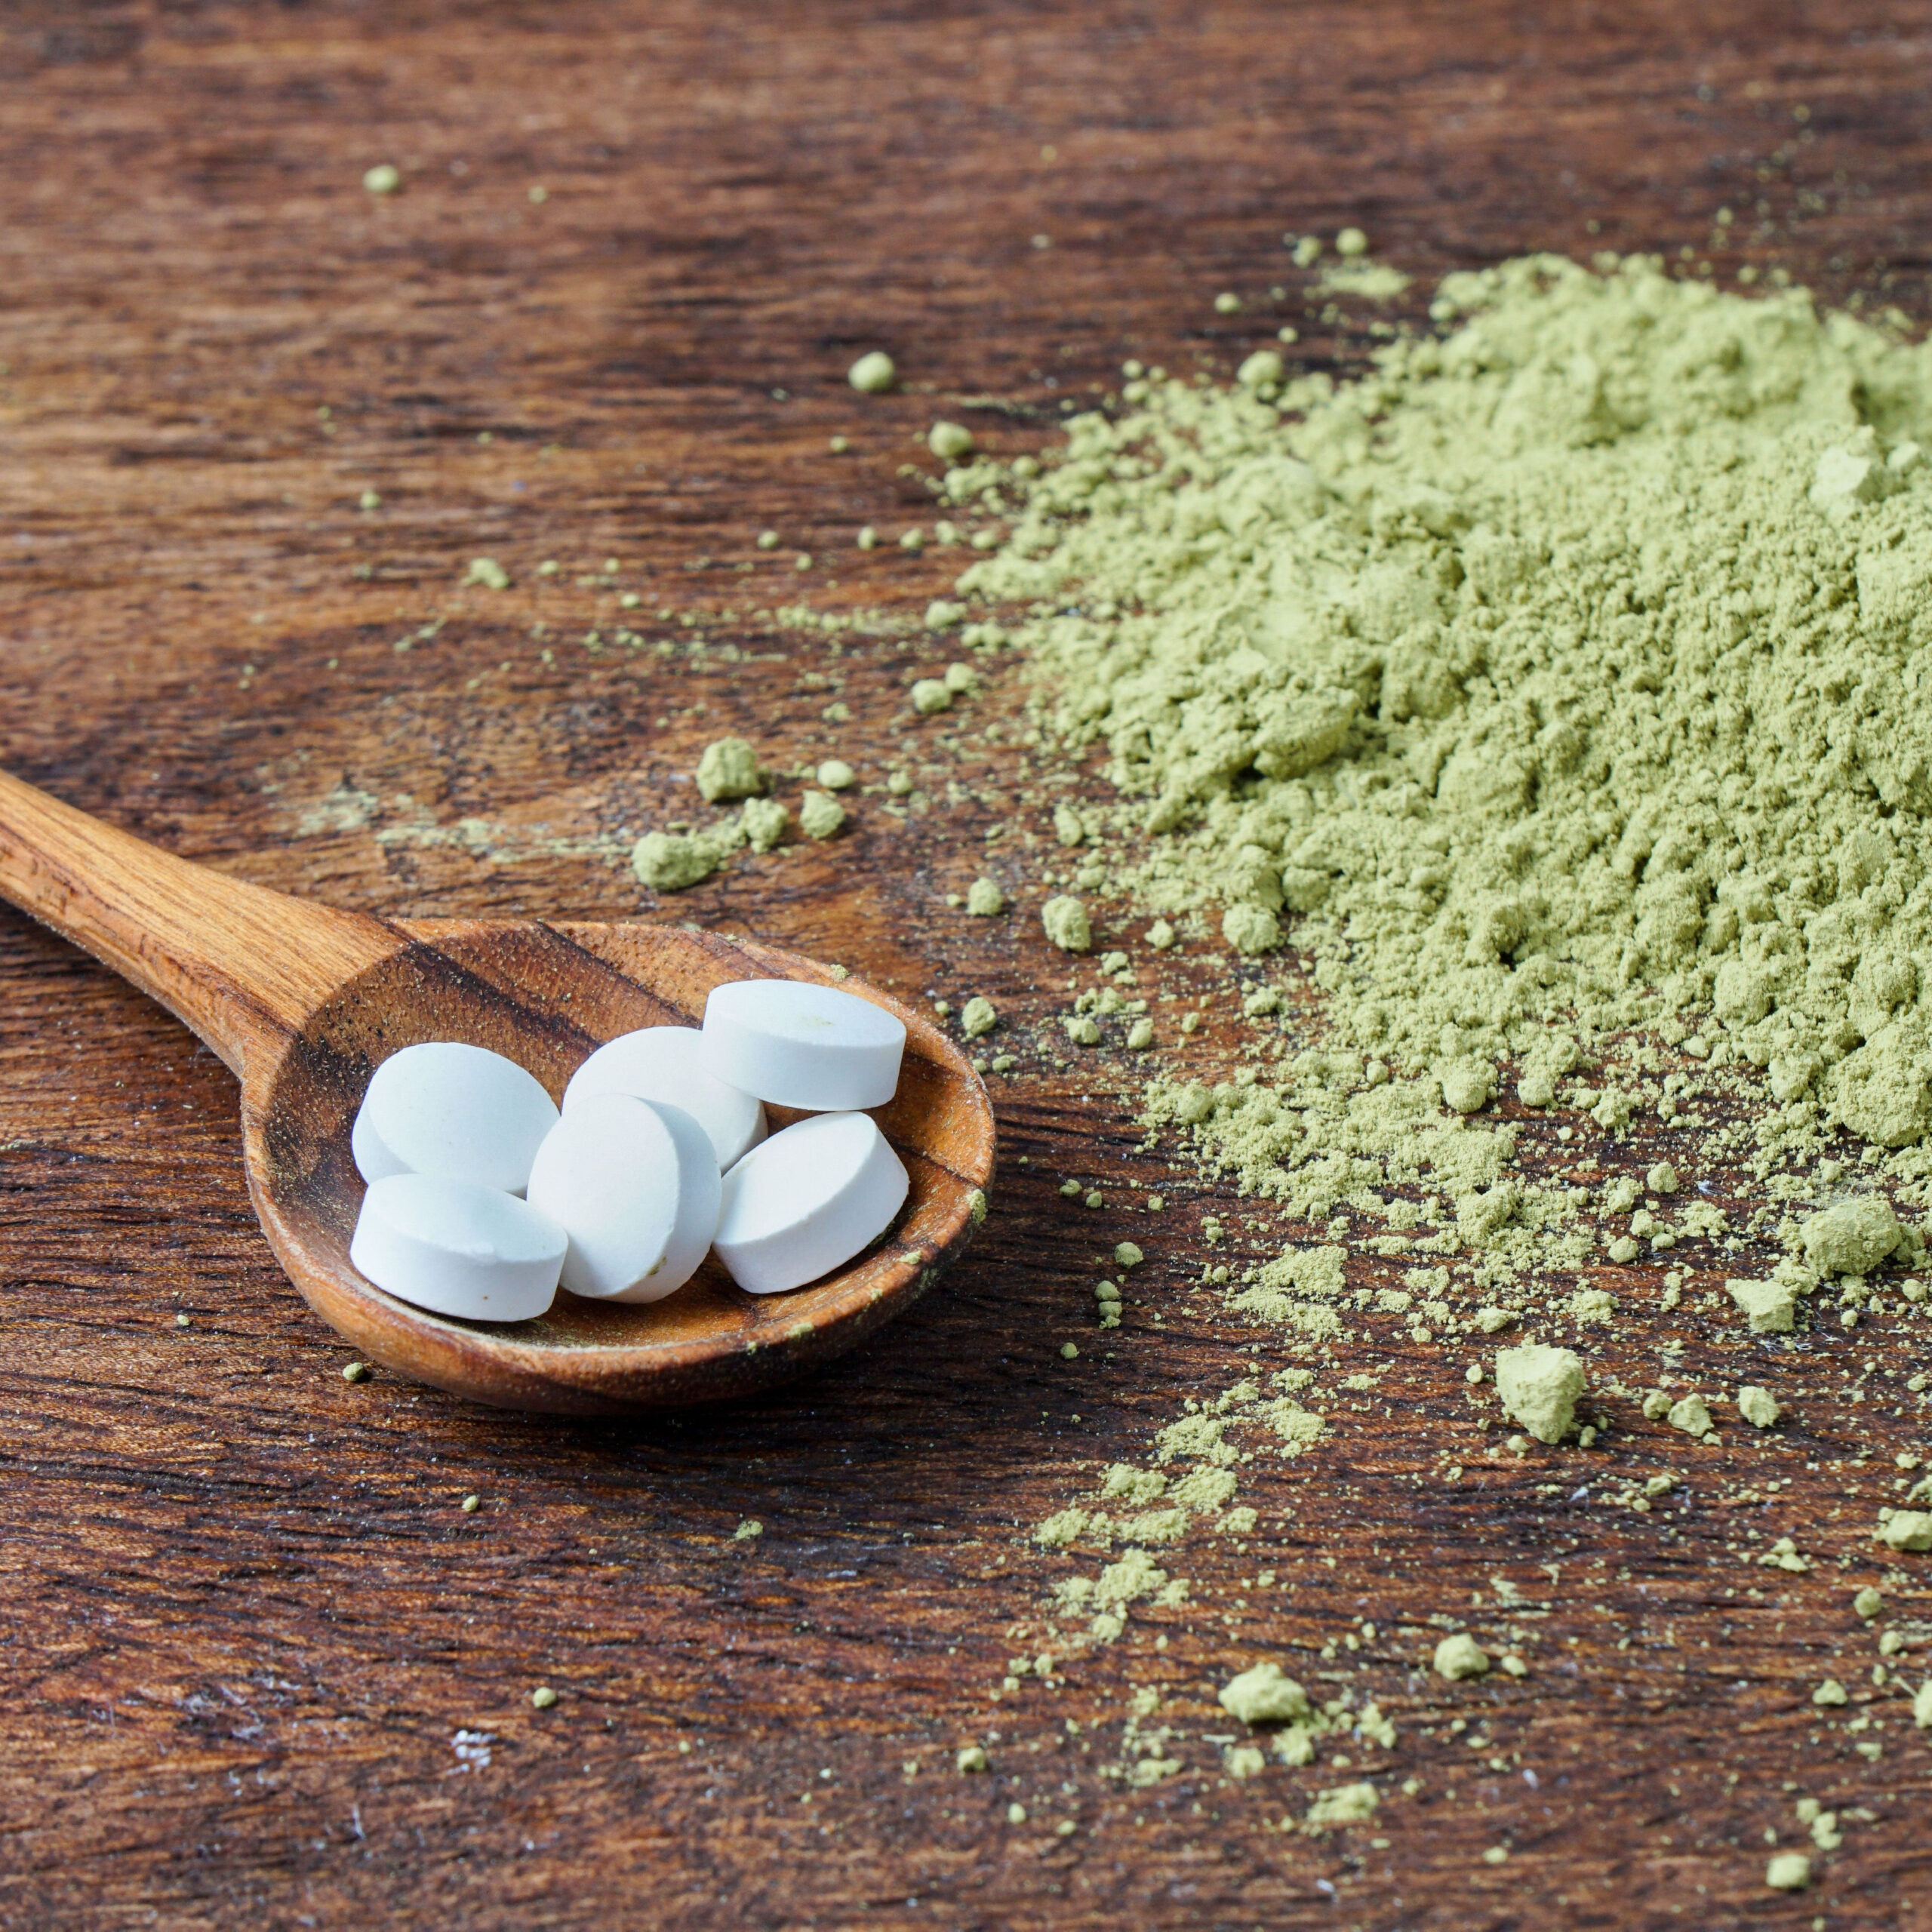 l-theanine supplements in small spoon beside green tea powder